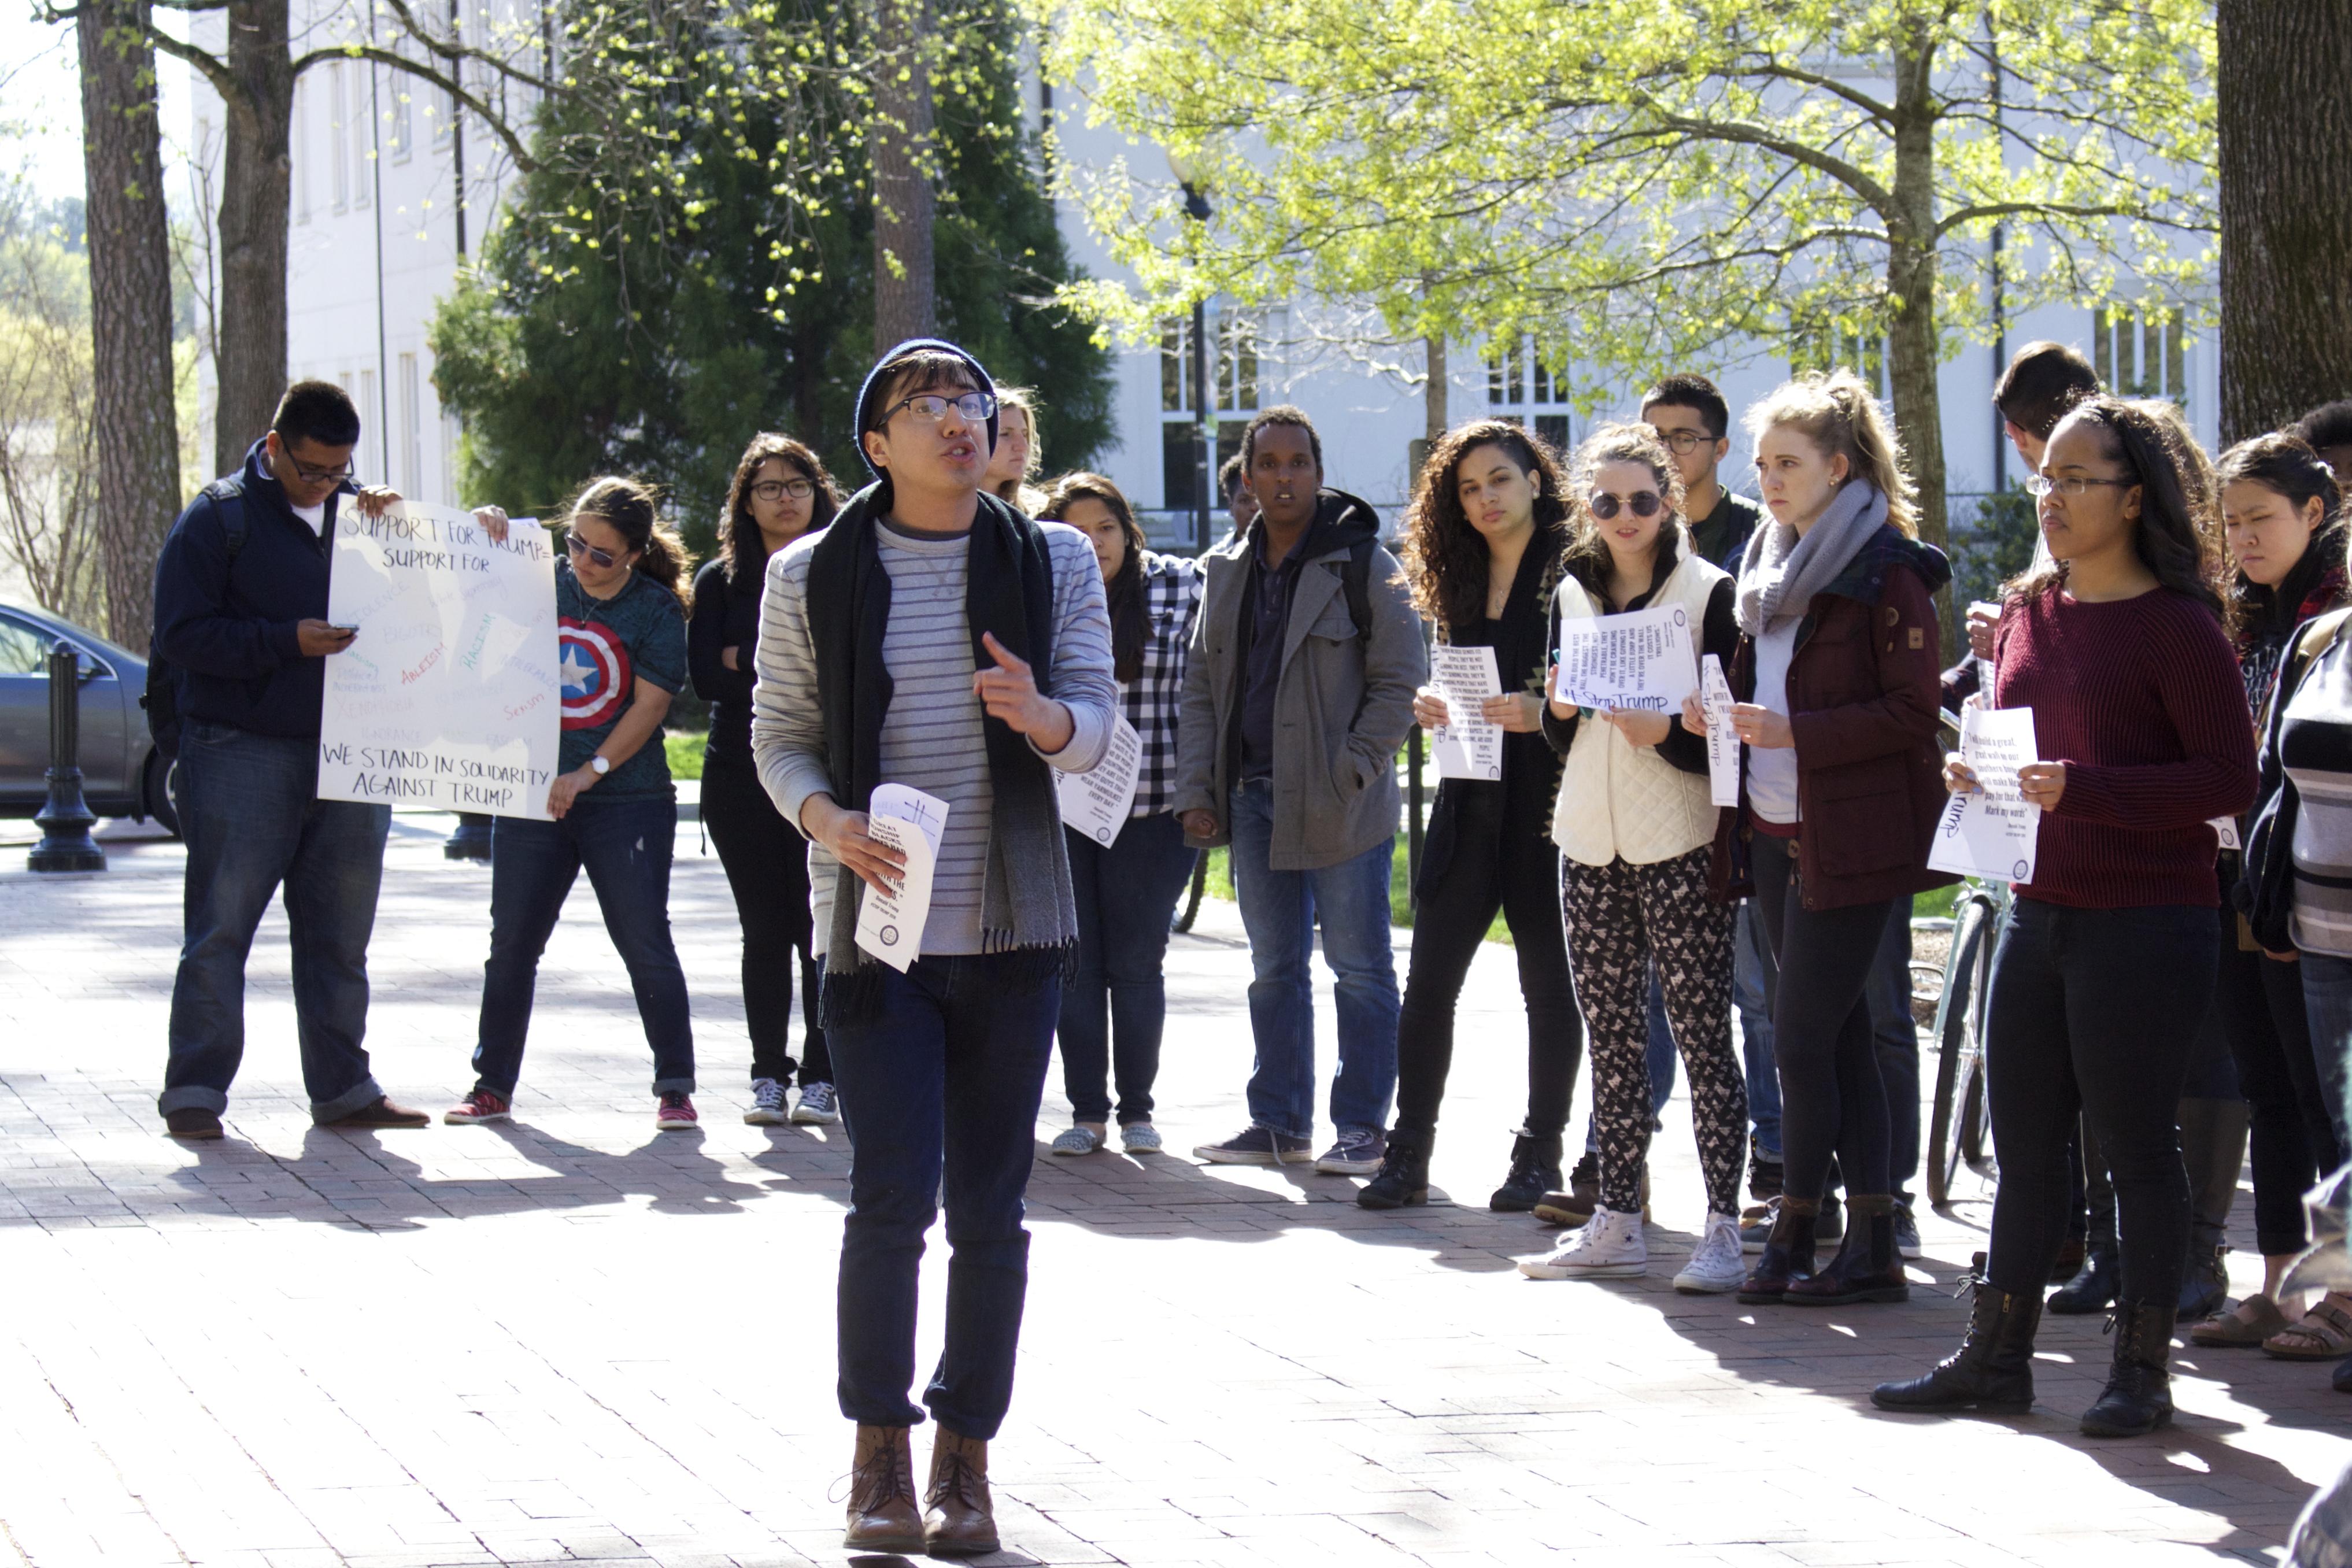 Emory Students Express Discontent With Administrative Response to